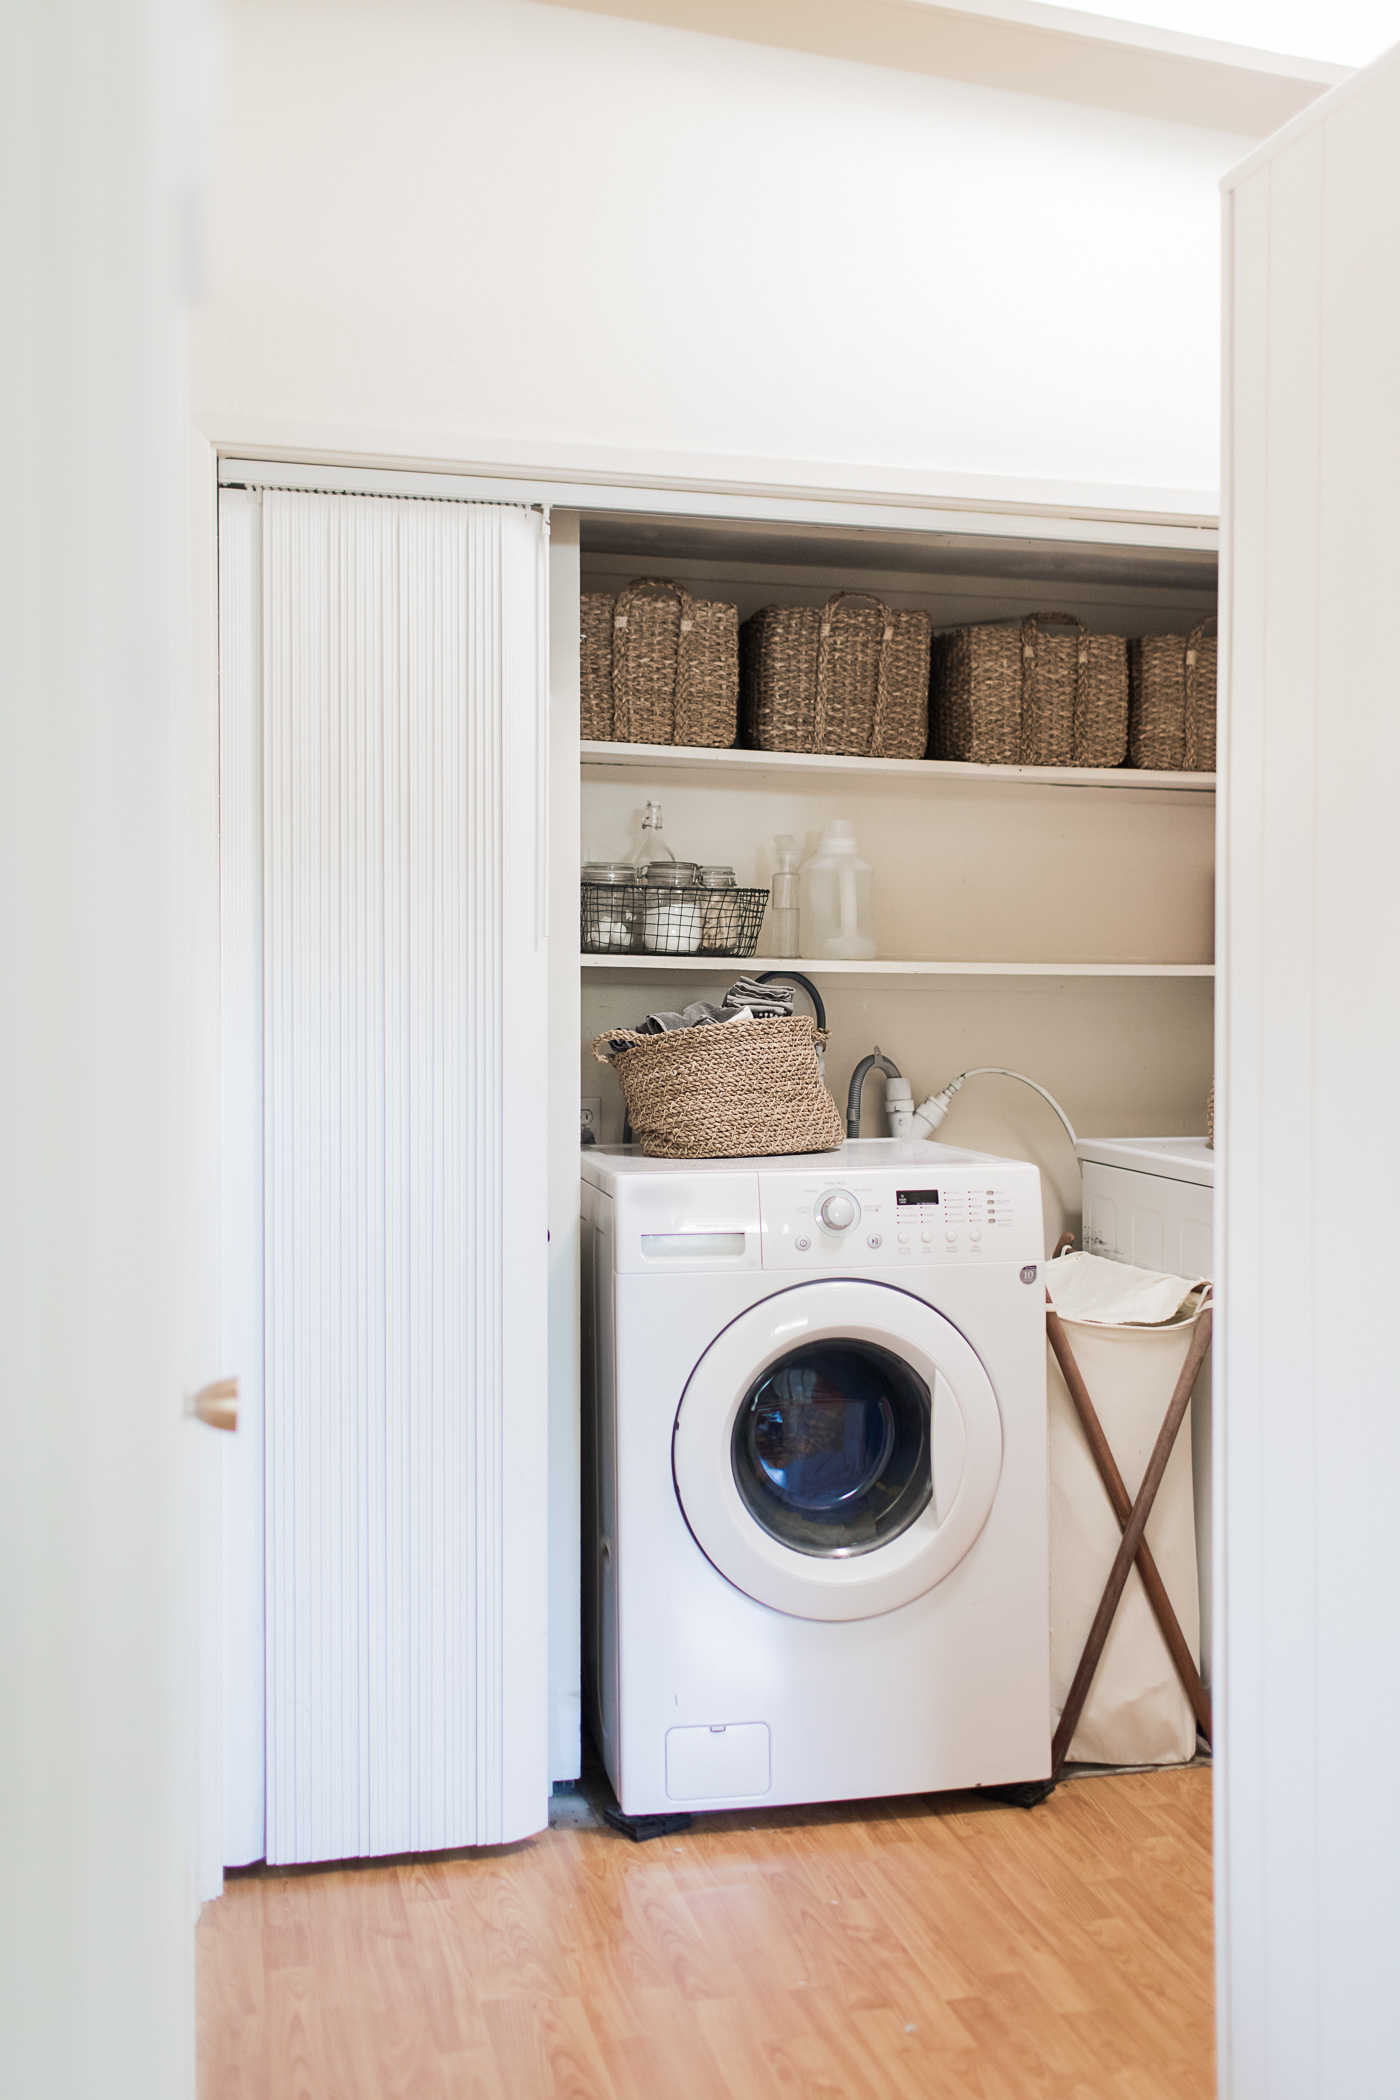 Small Space Laundry Room Dreams, the perfect design for a small laundry room or one that's limited on space. It's relaxing, neutral-toned, and minimal.